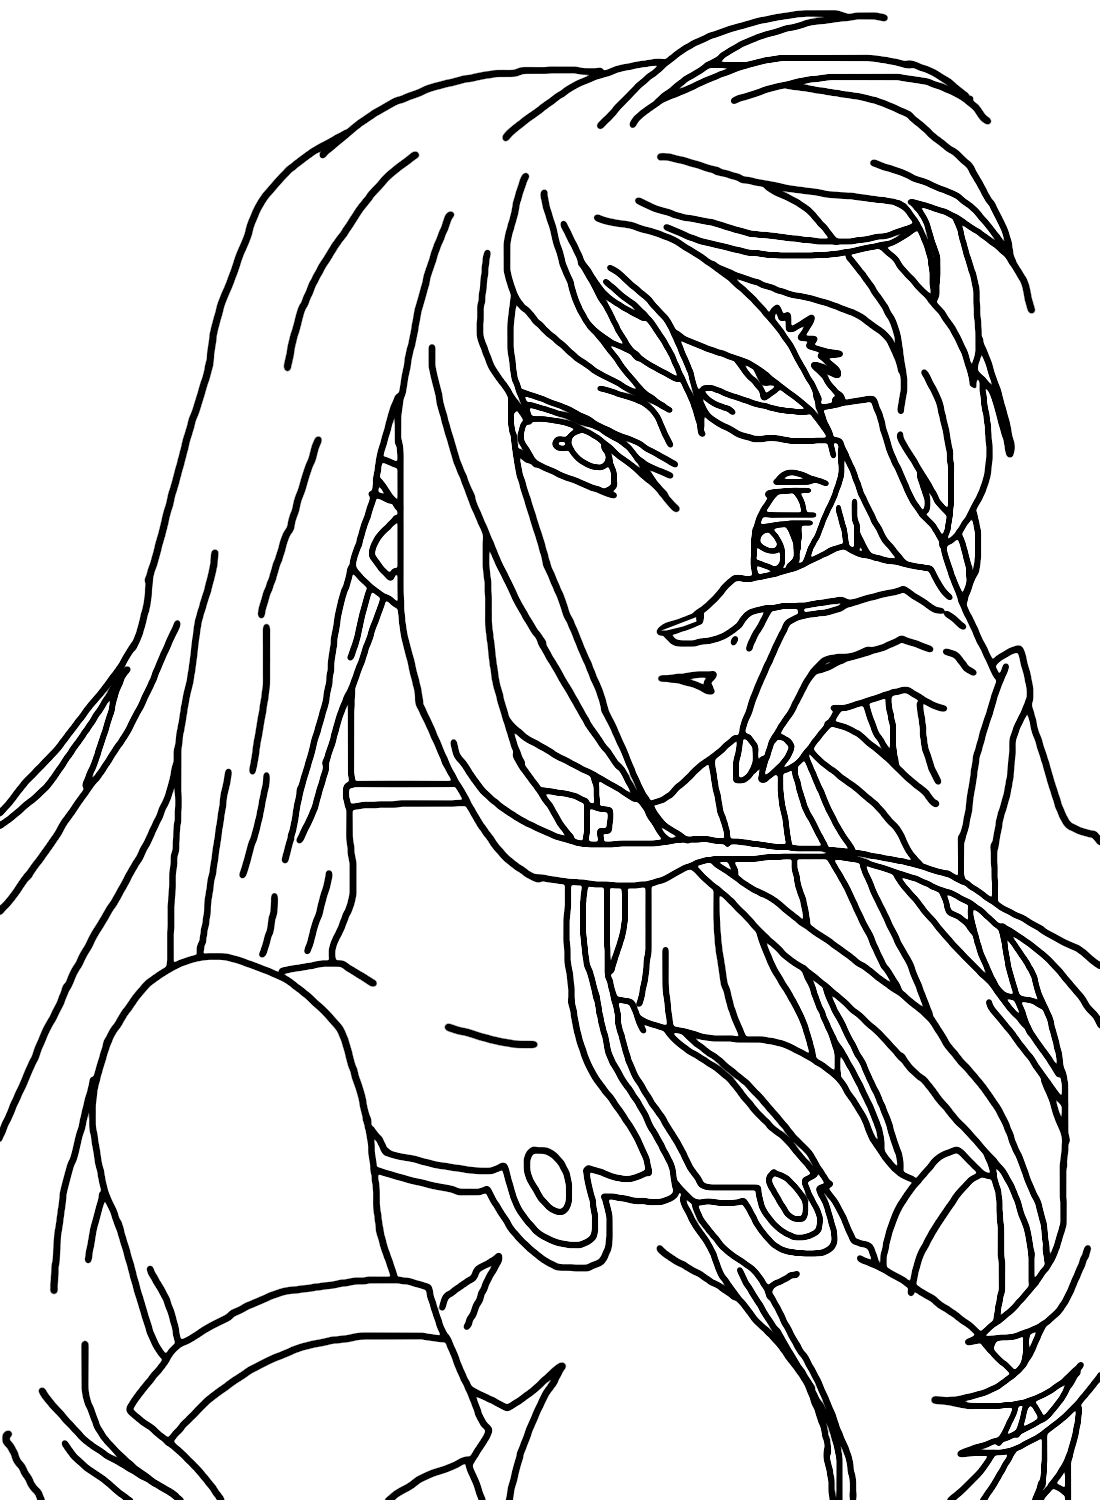 Free C.C. Code Geass Coloring Page from C.C. Code Geass